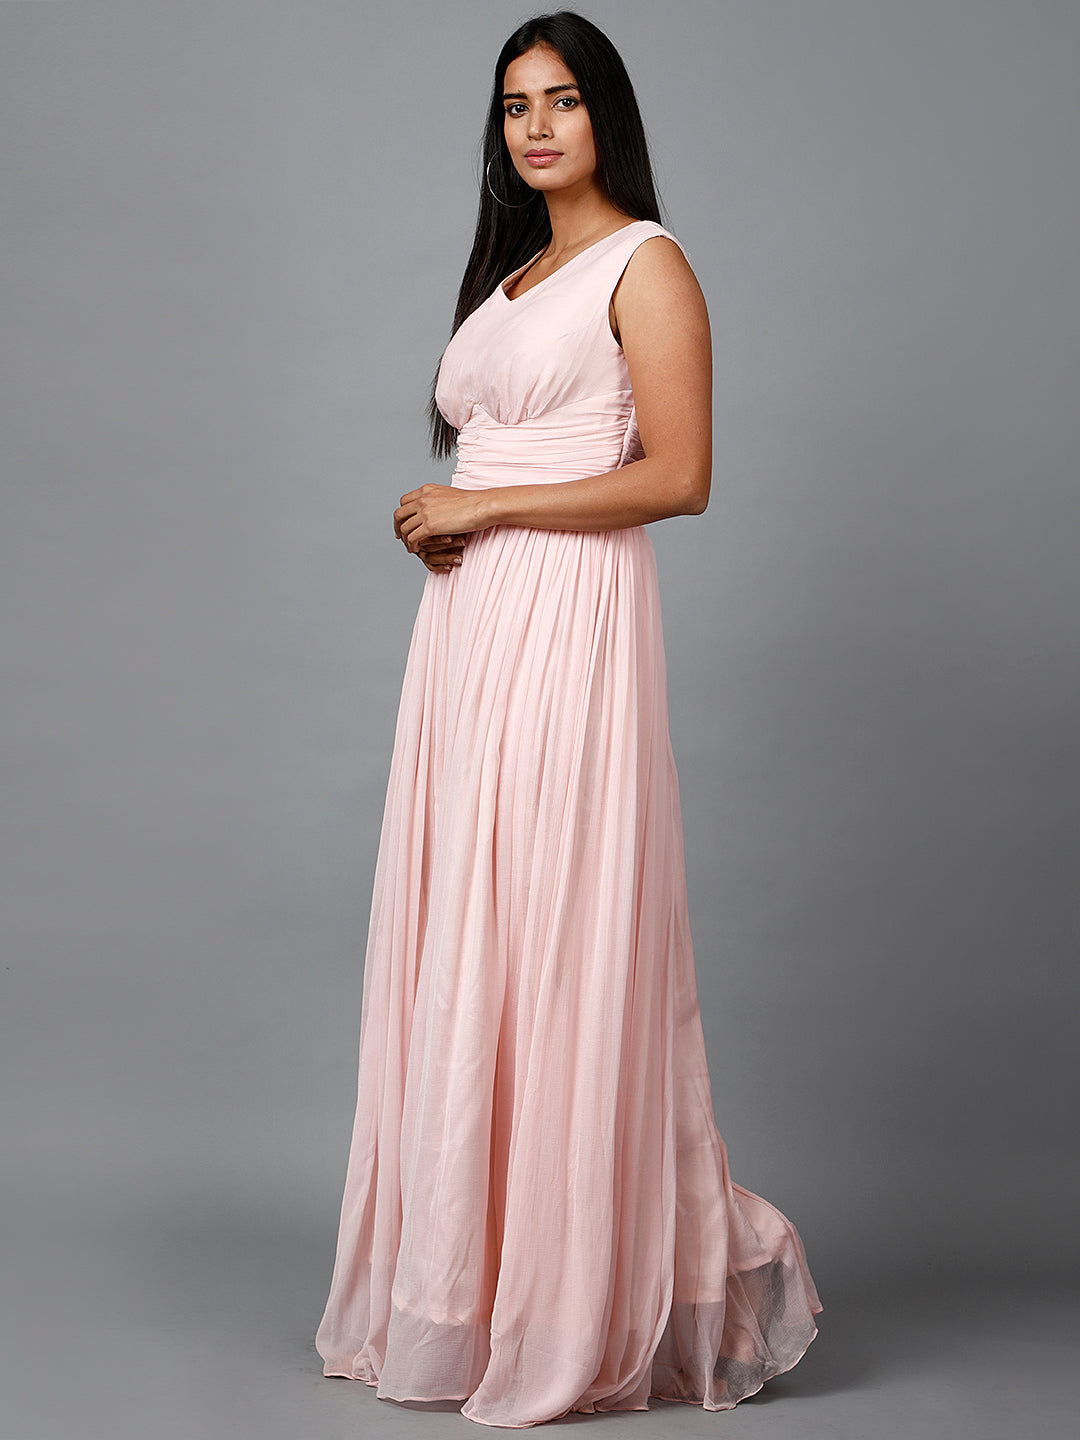 Miracolos By Ruchi's Beautiful Sleeveless V- Neck Chiffon Gown  - Rent